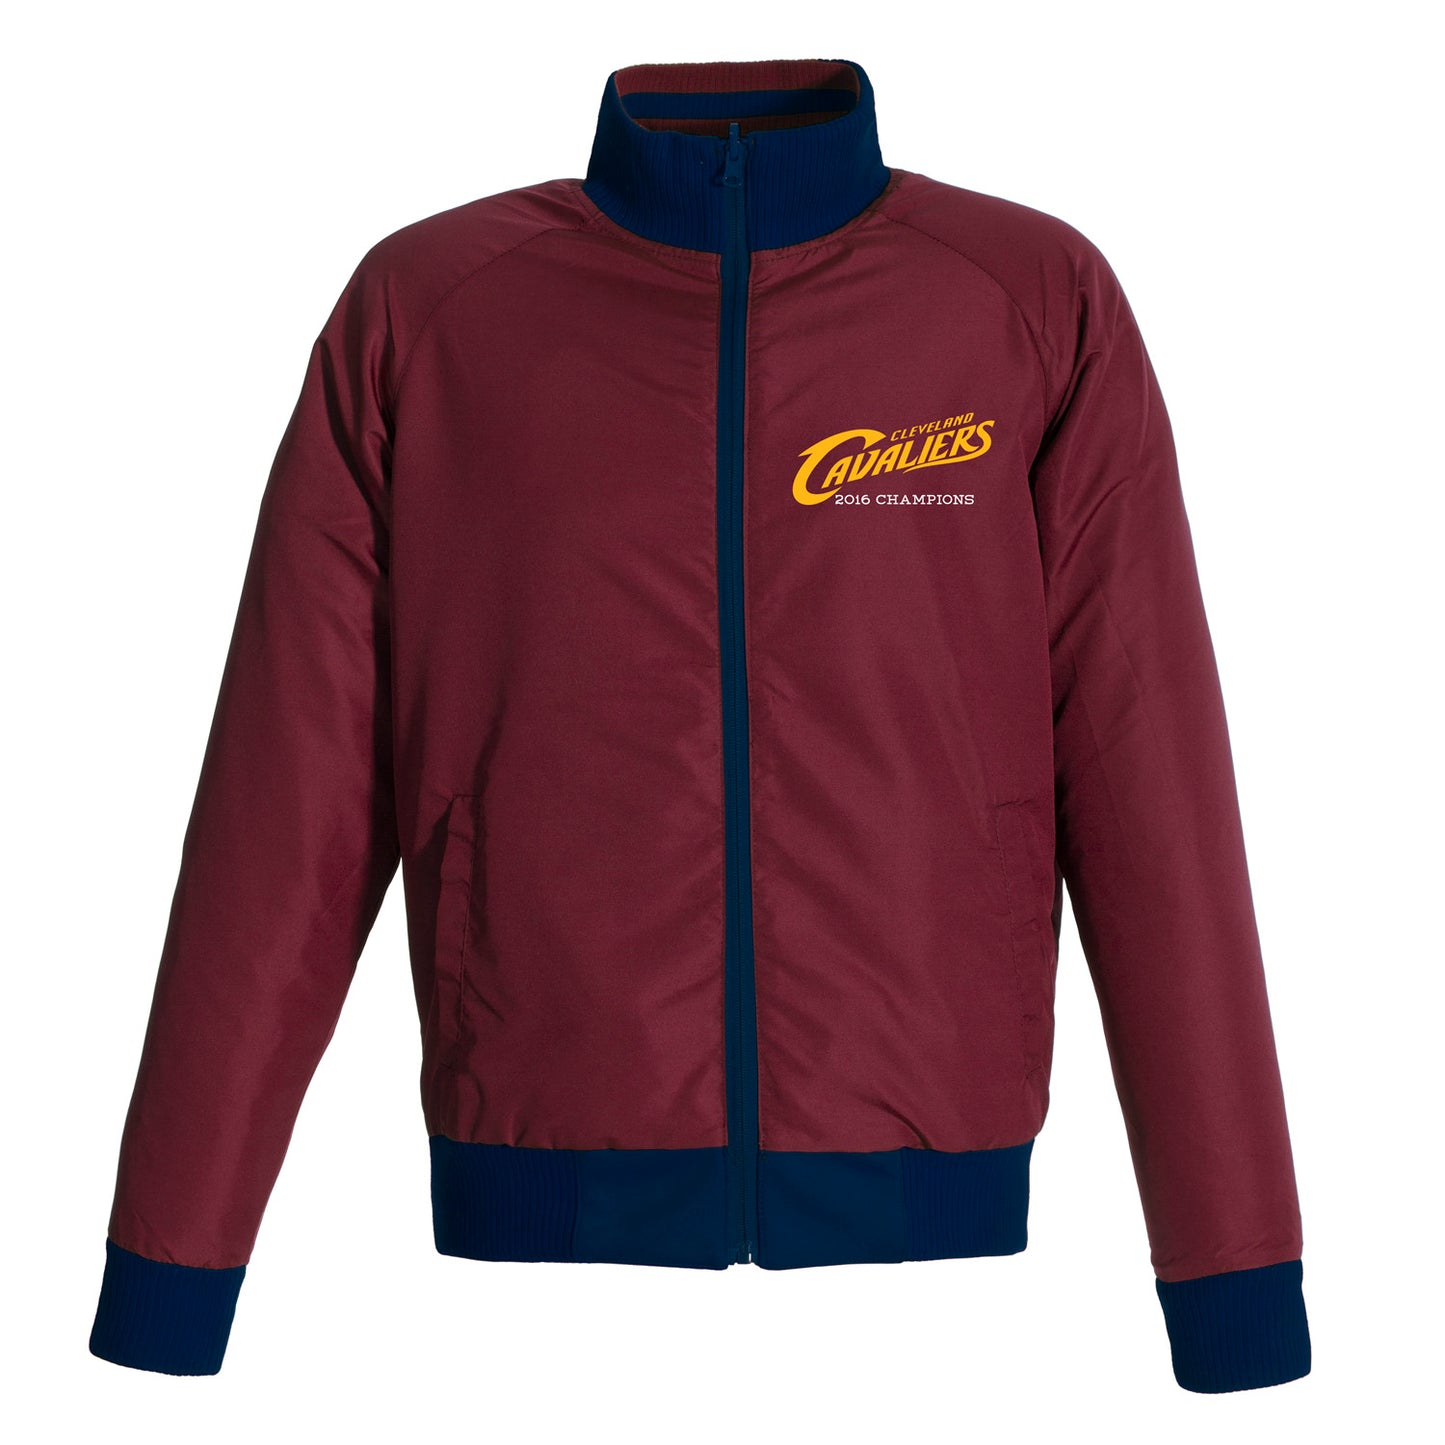 Cleveland Cavaliers 2016 Championship Polyester Track Jacket